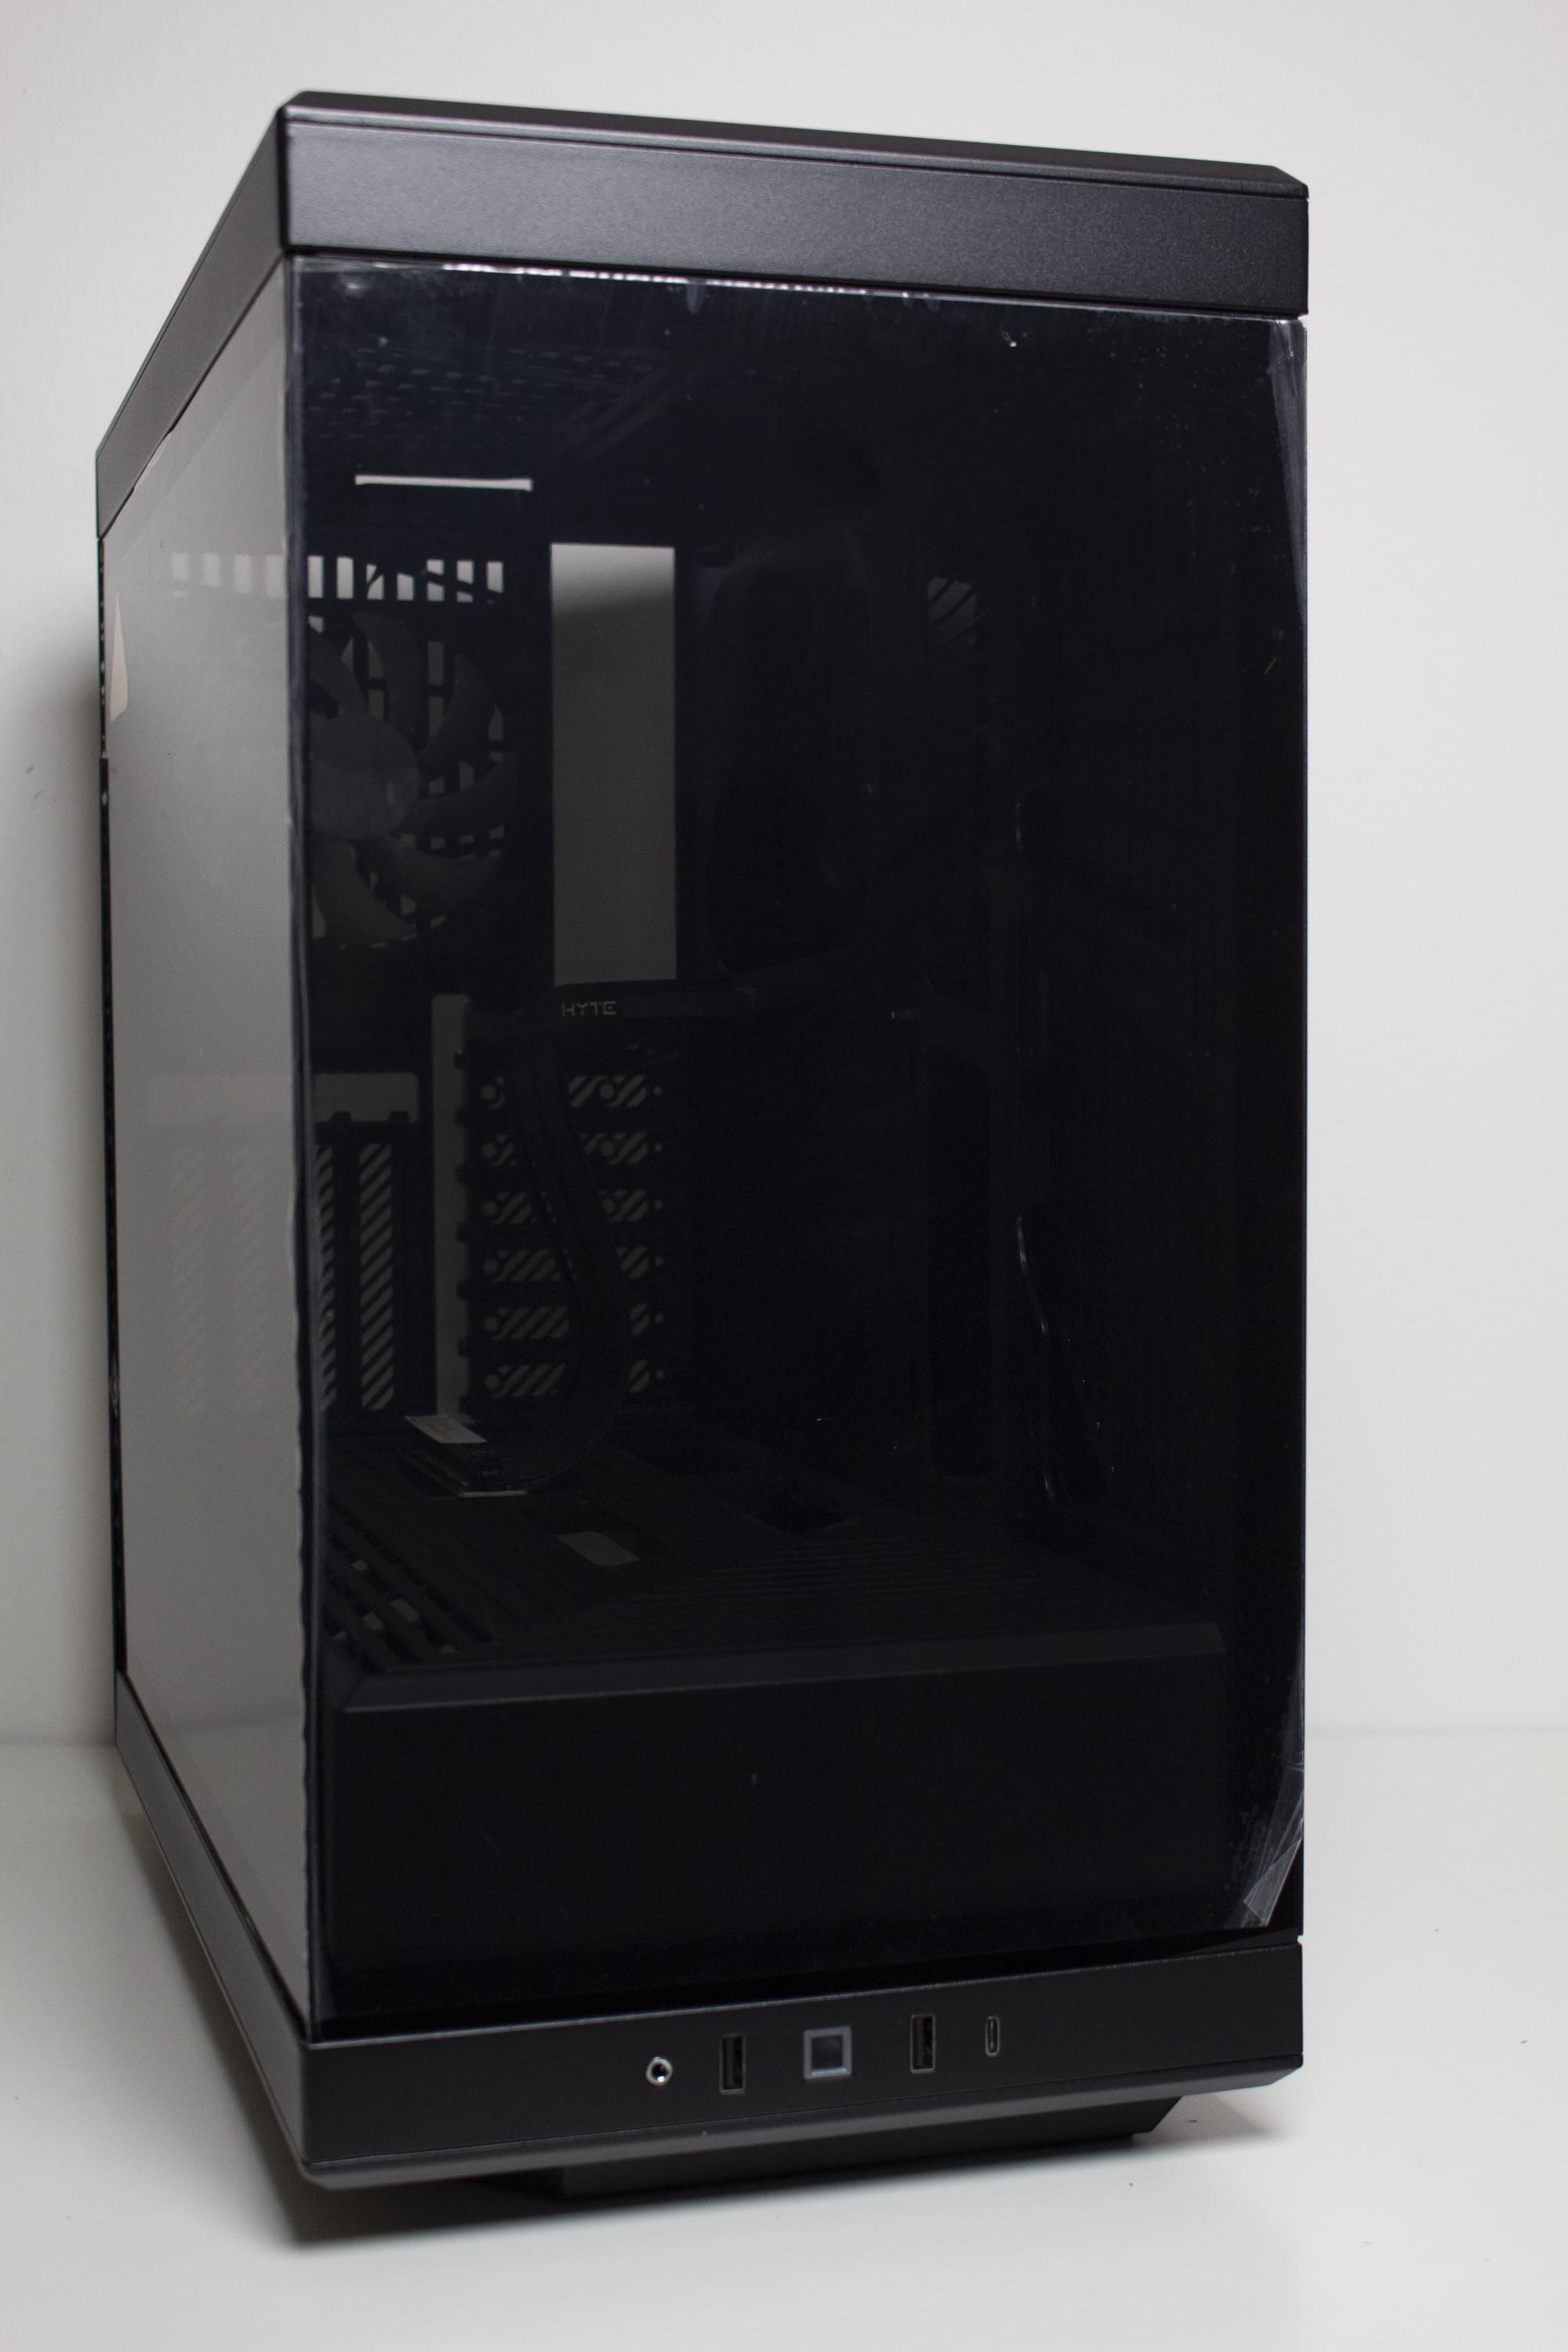 HYTE Y40 Mainstream Vertical GPU Case ATX Mid Tower Gaming Case